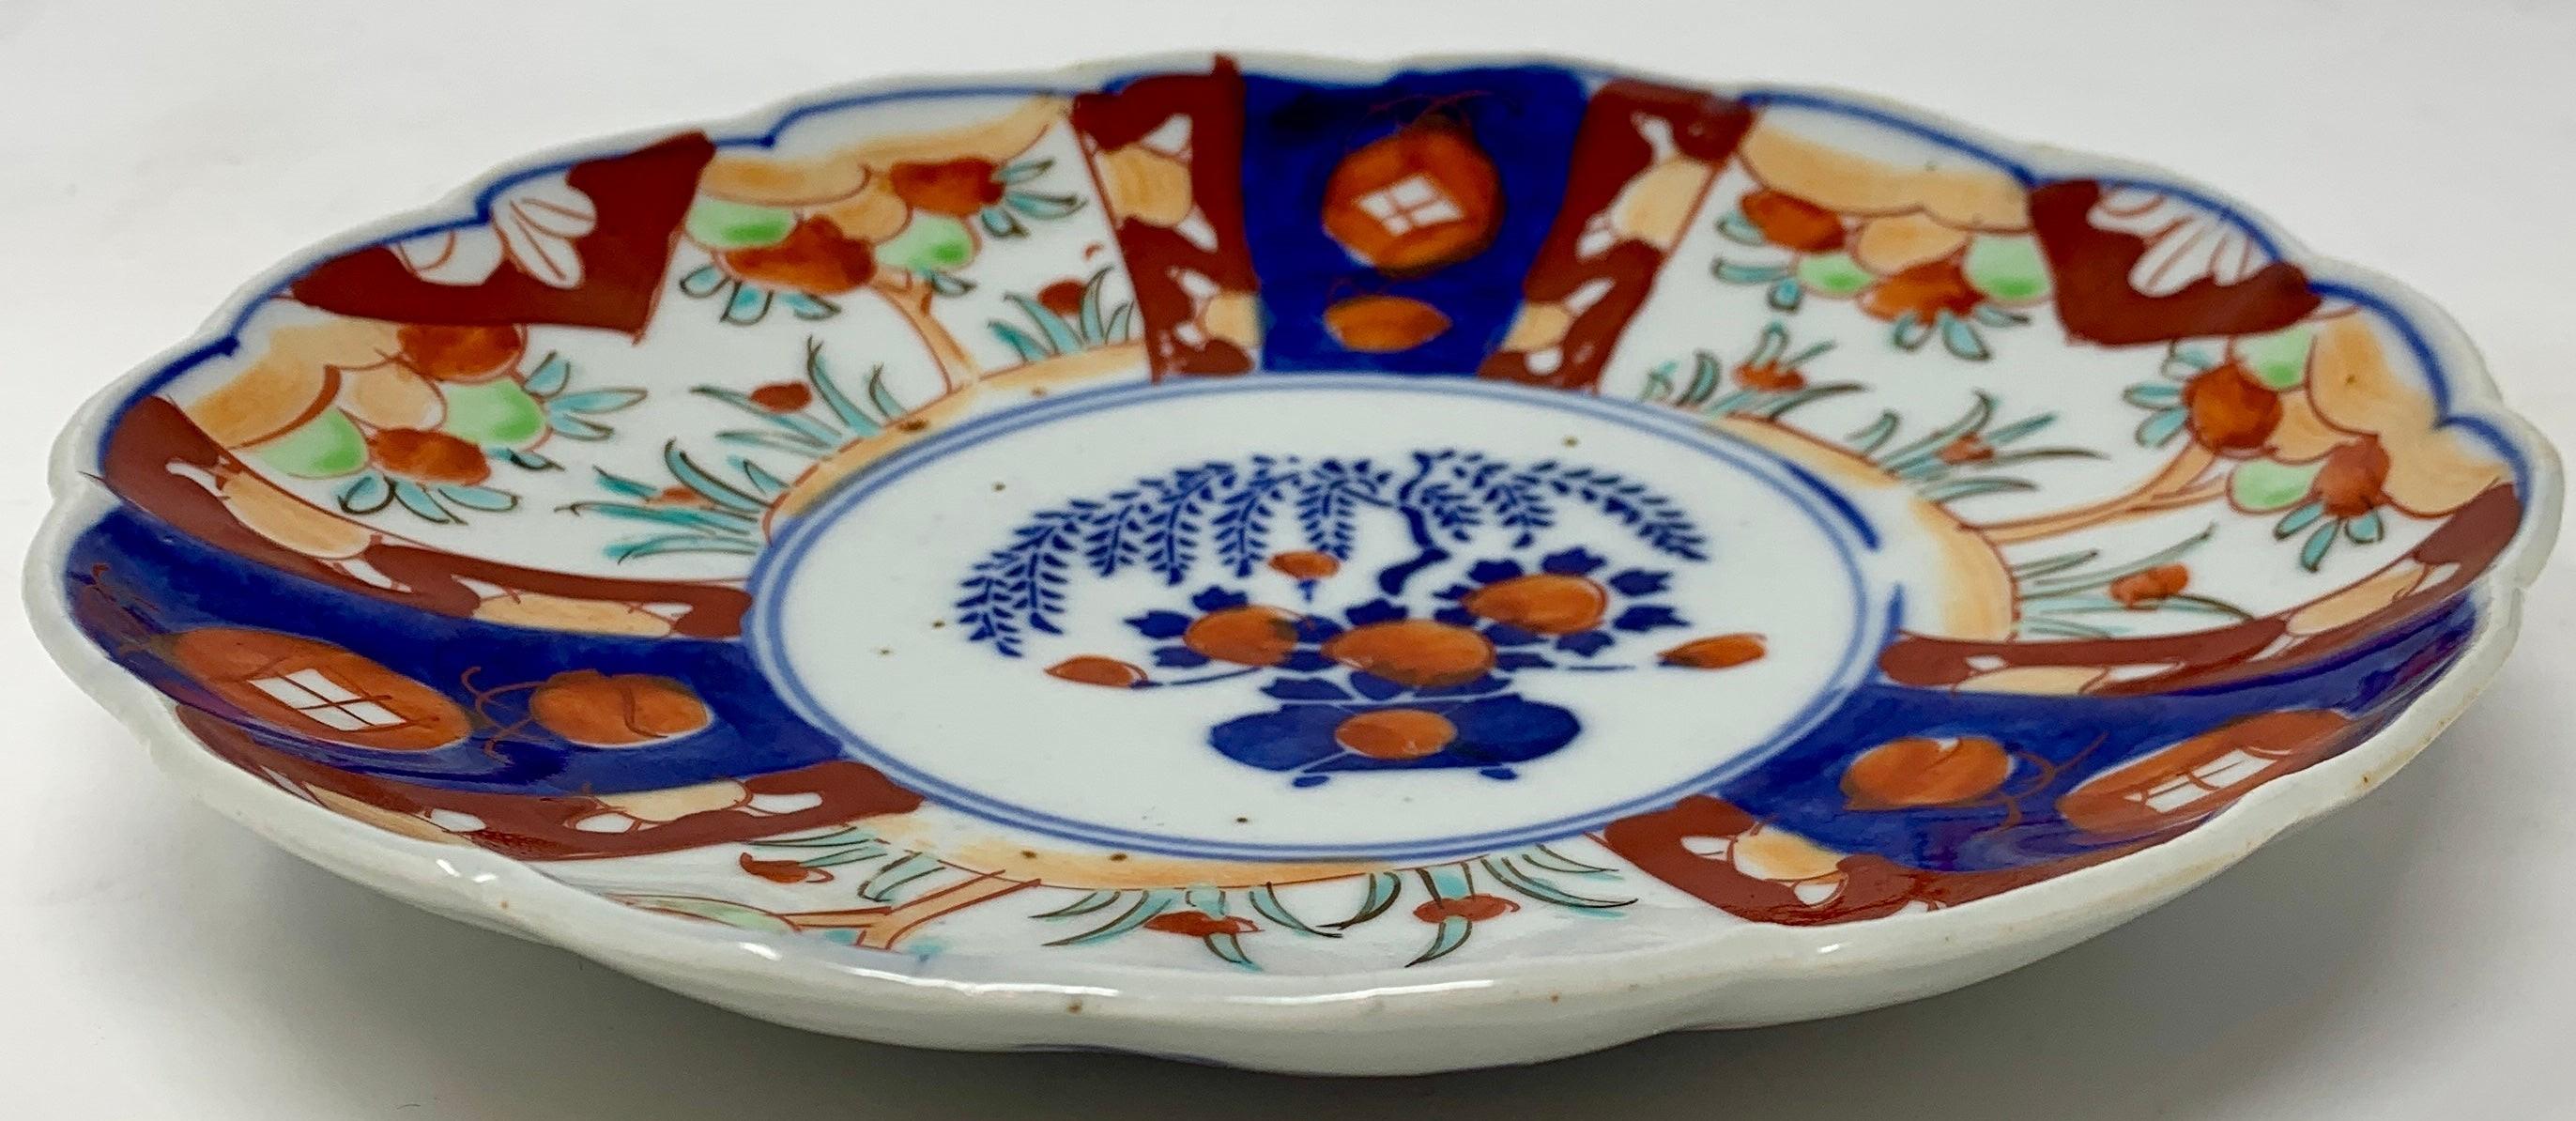 A very nice set of luncheon size Imari plates. Beautiful colors that have withstood the test of time and use.